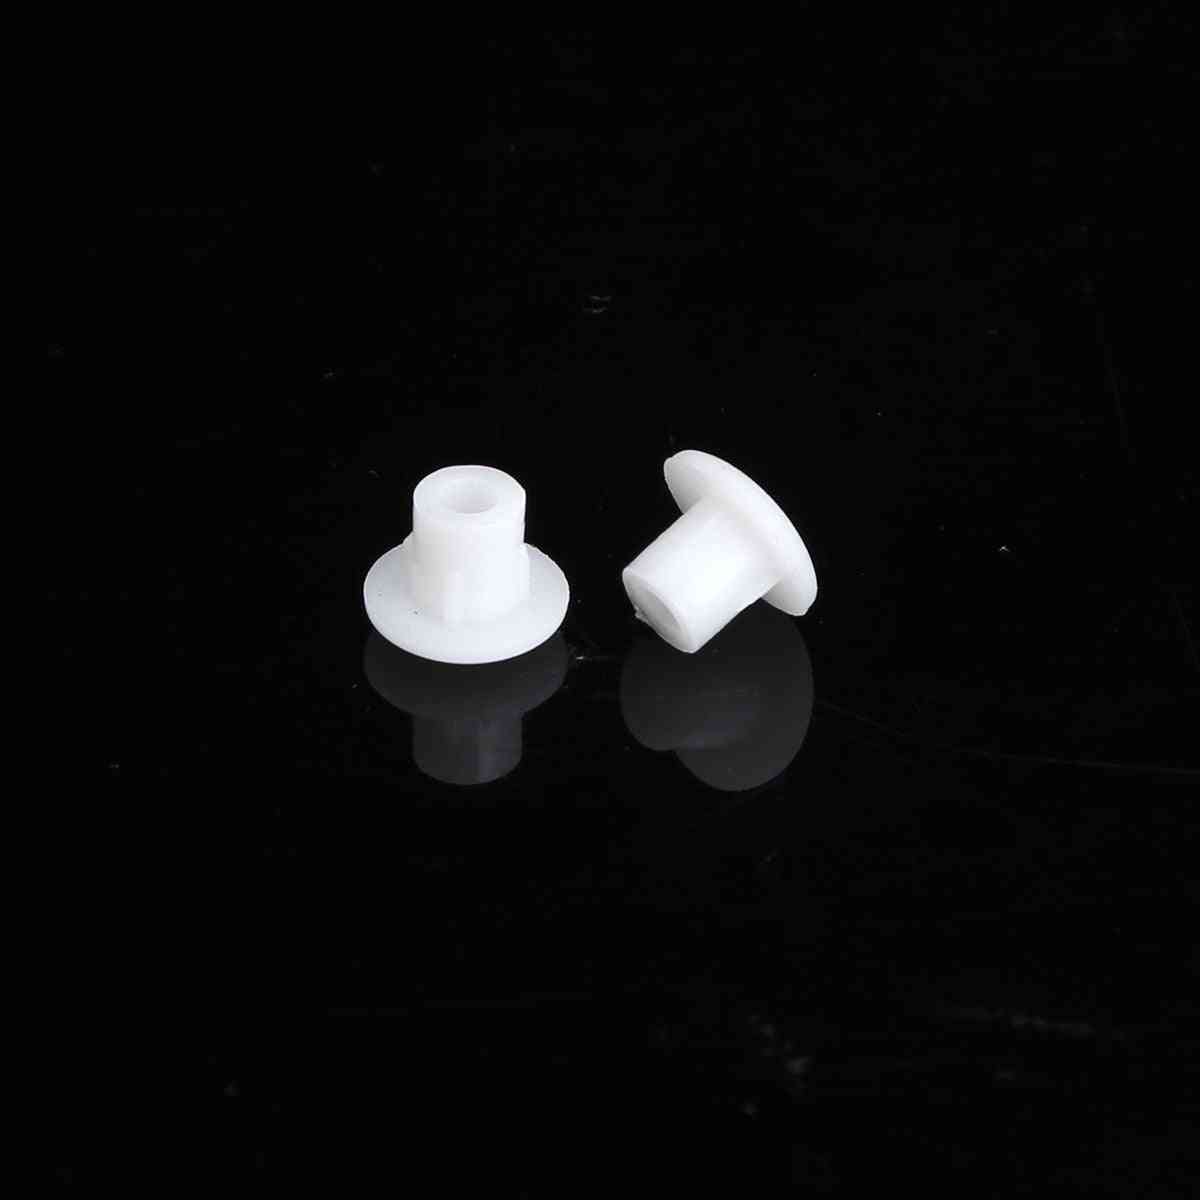 Plastic Hole Plugs Screw Caps Cover For Chair Cabinet Cupboard Shelf